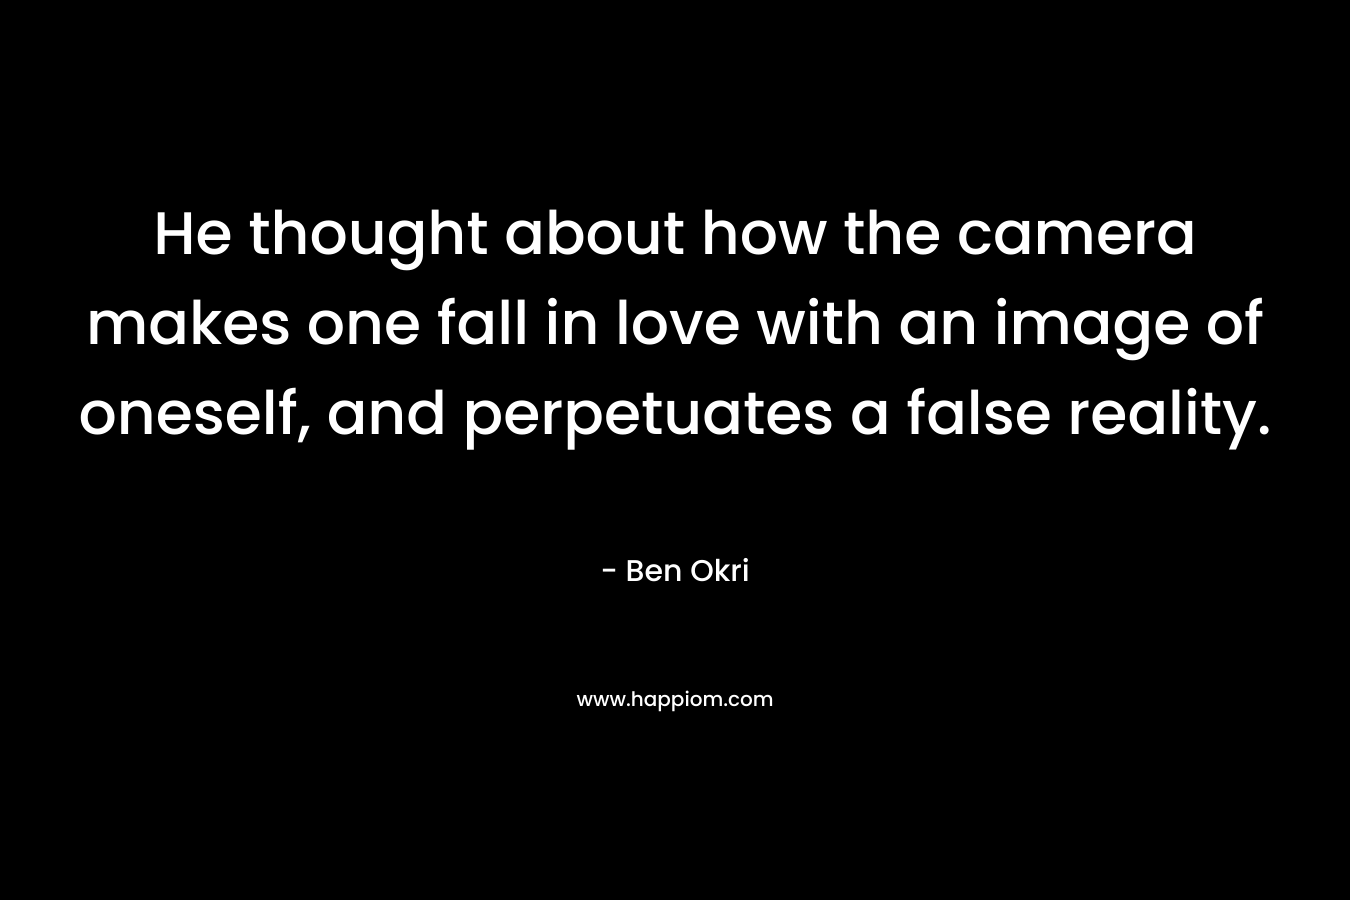 He thought about how the camera makes one fall in love with an image of oneself, and perpetuates a false reality. – Ben Okri